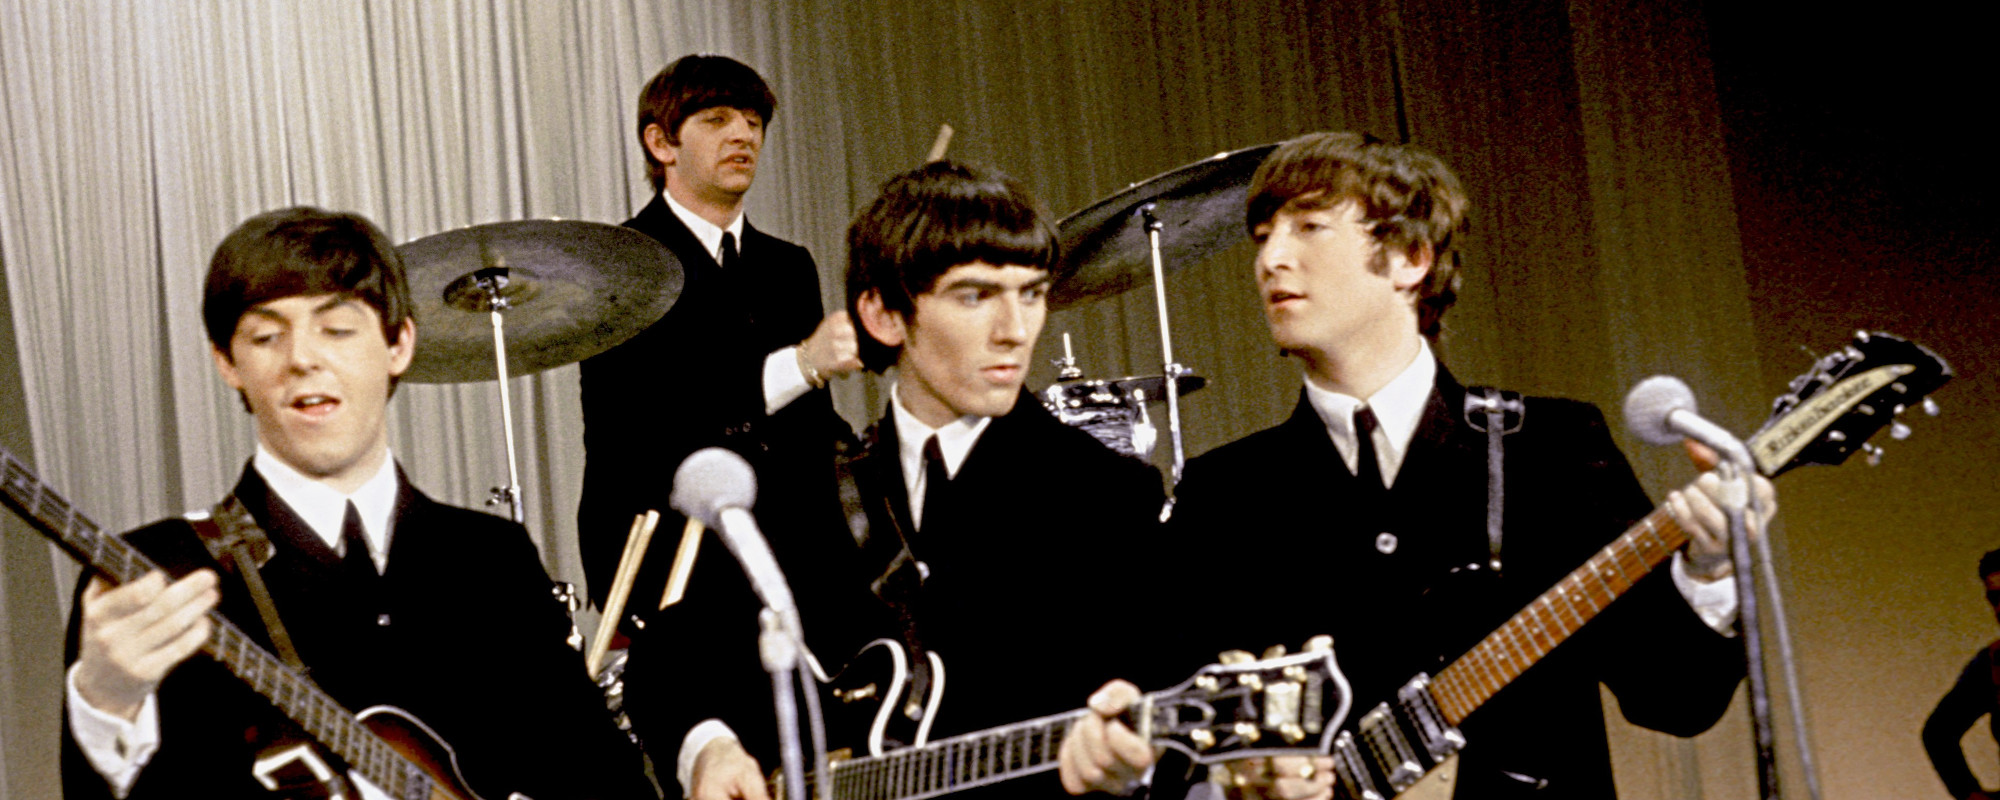 Making the Case for The Beatles’ Unheralded 1964 Album ‘Beatles for Sale’